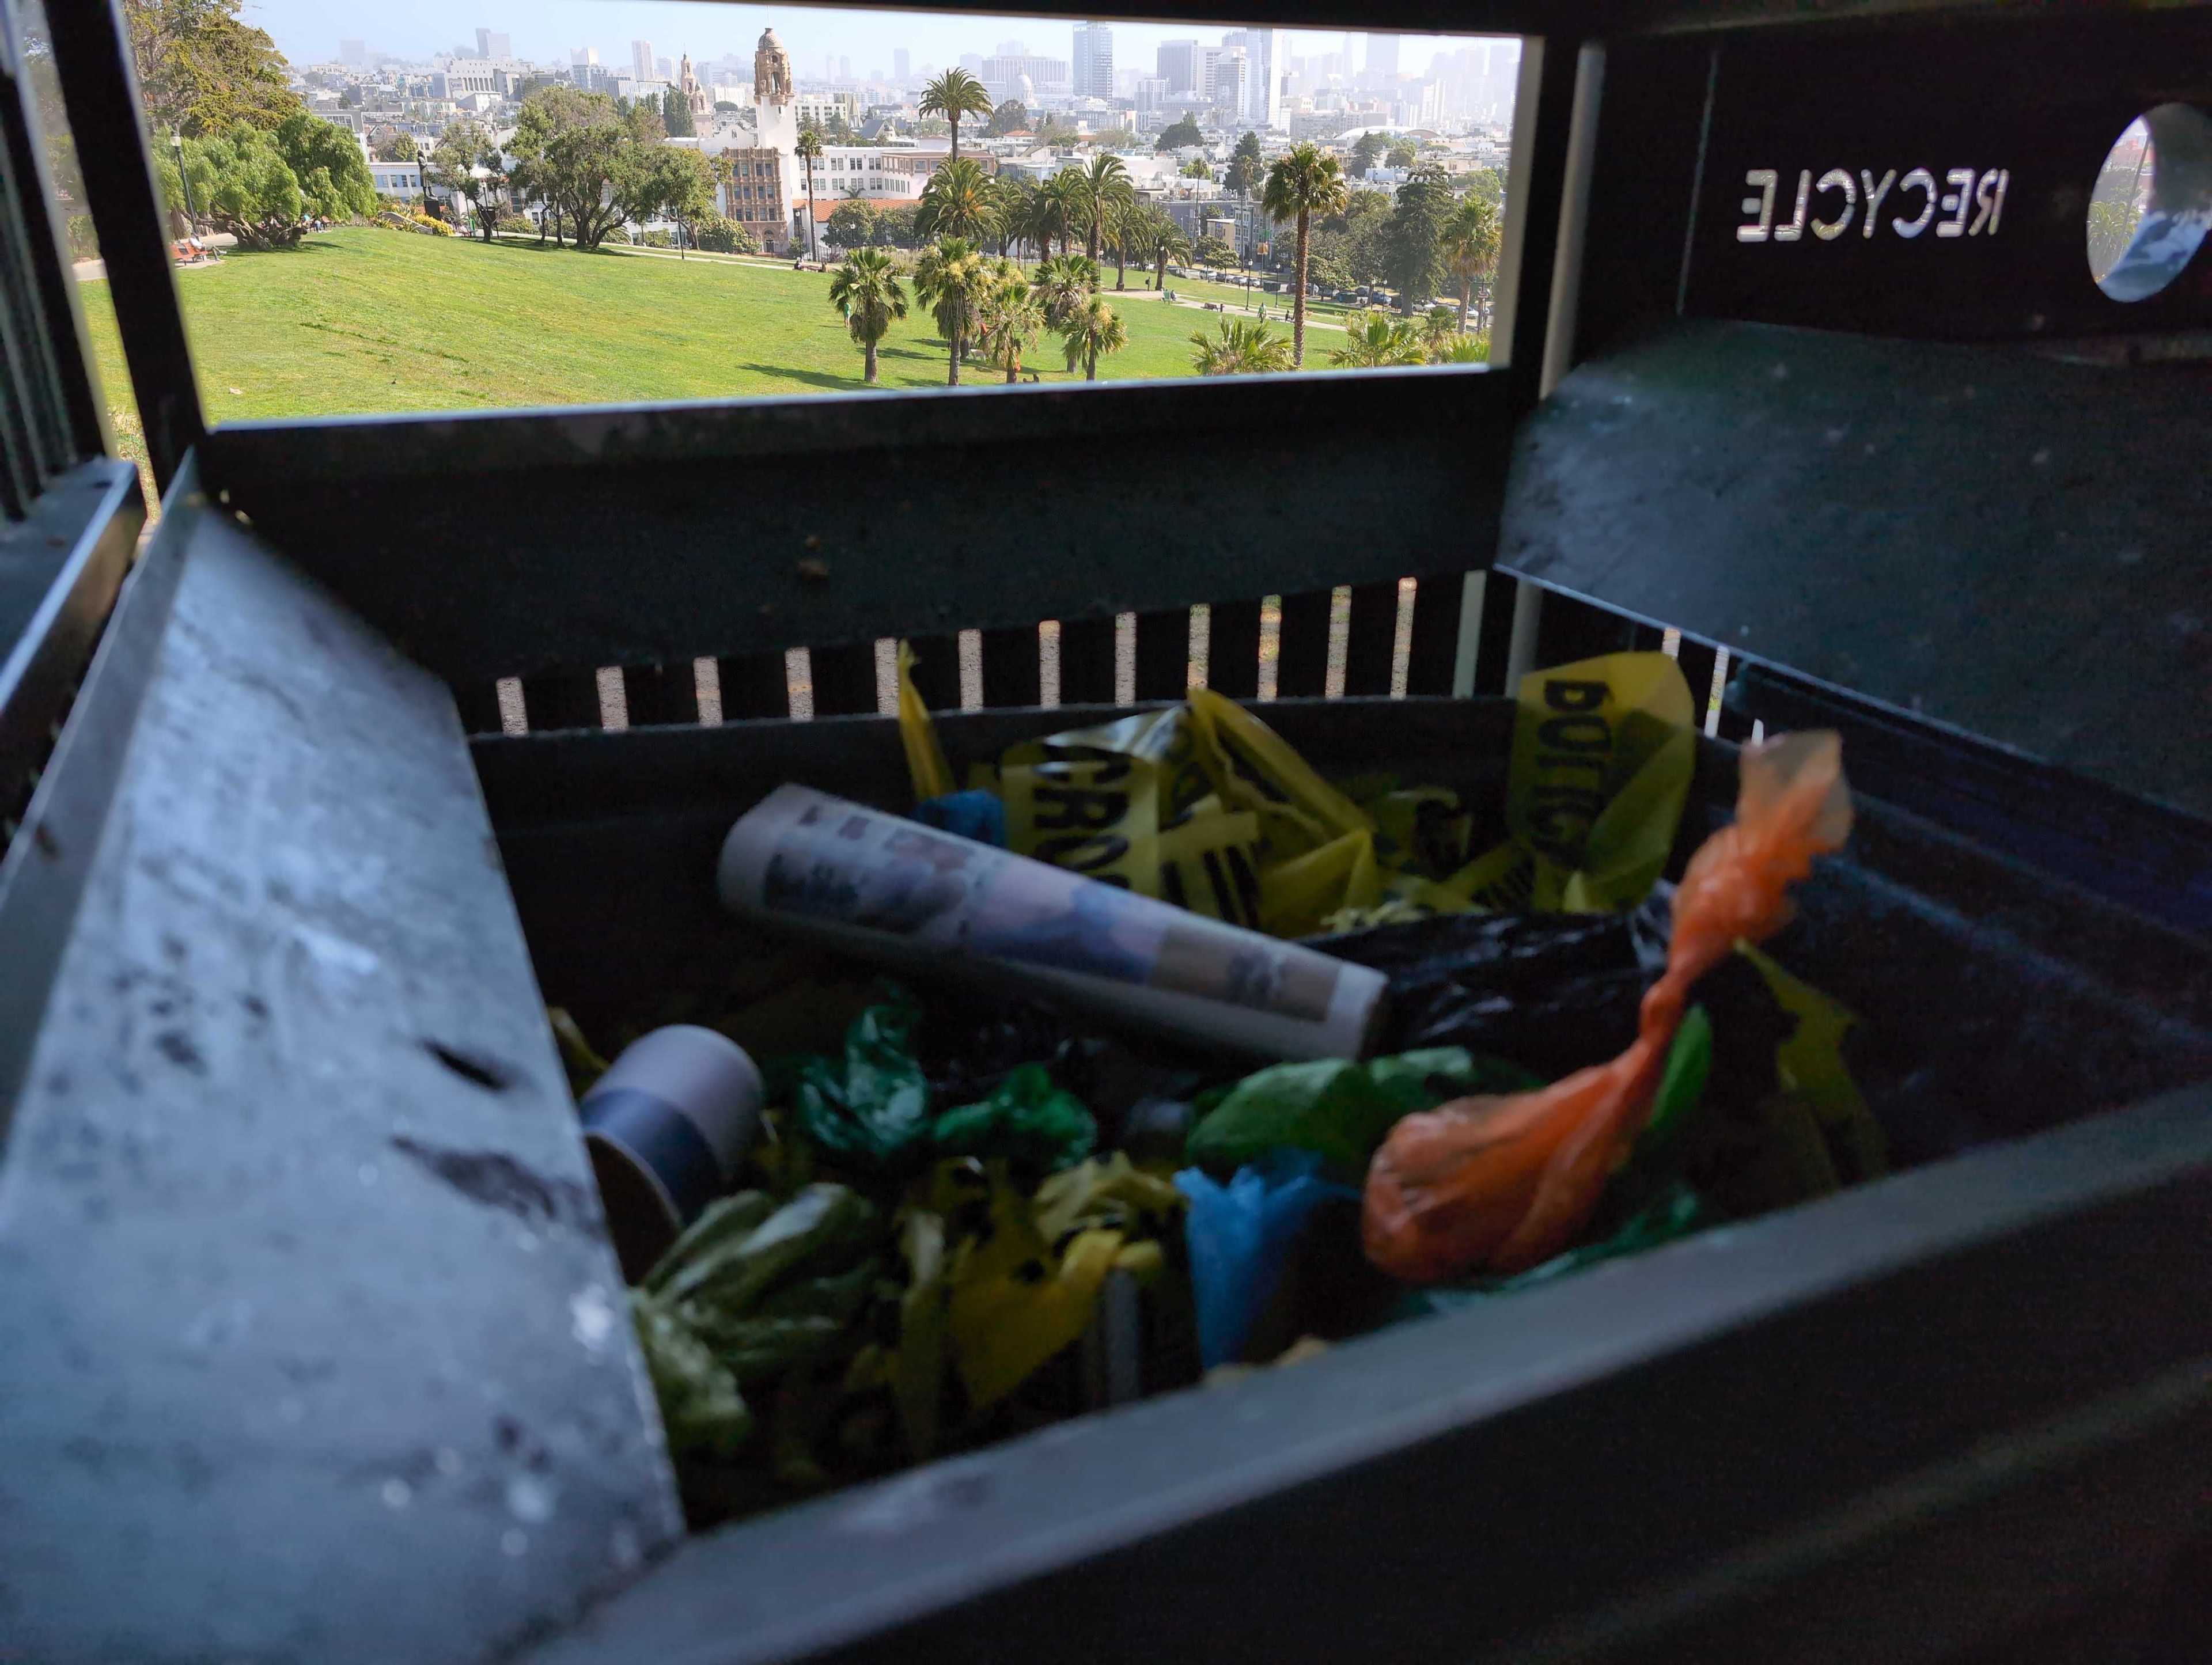 The image shows a recycling bin filled with various items and a view of a park with palm trees, a tower, and a cityscape in the background through the bin's opening.